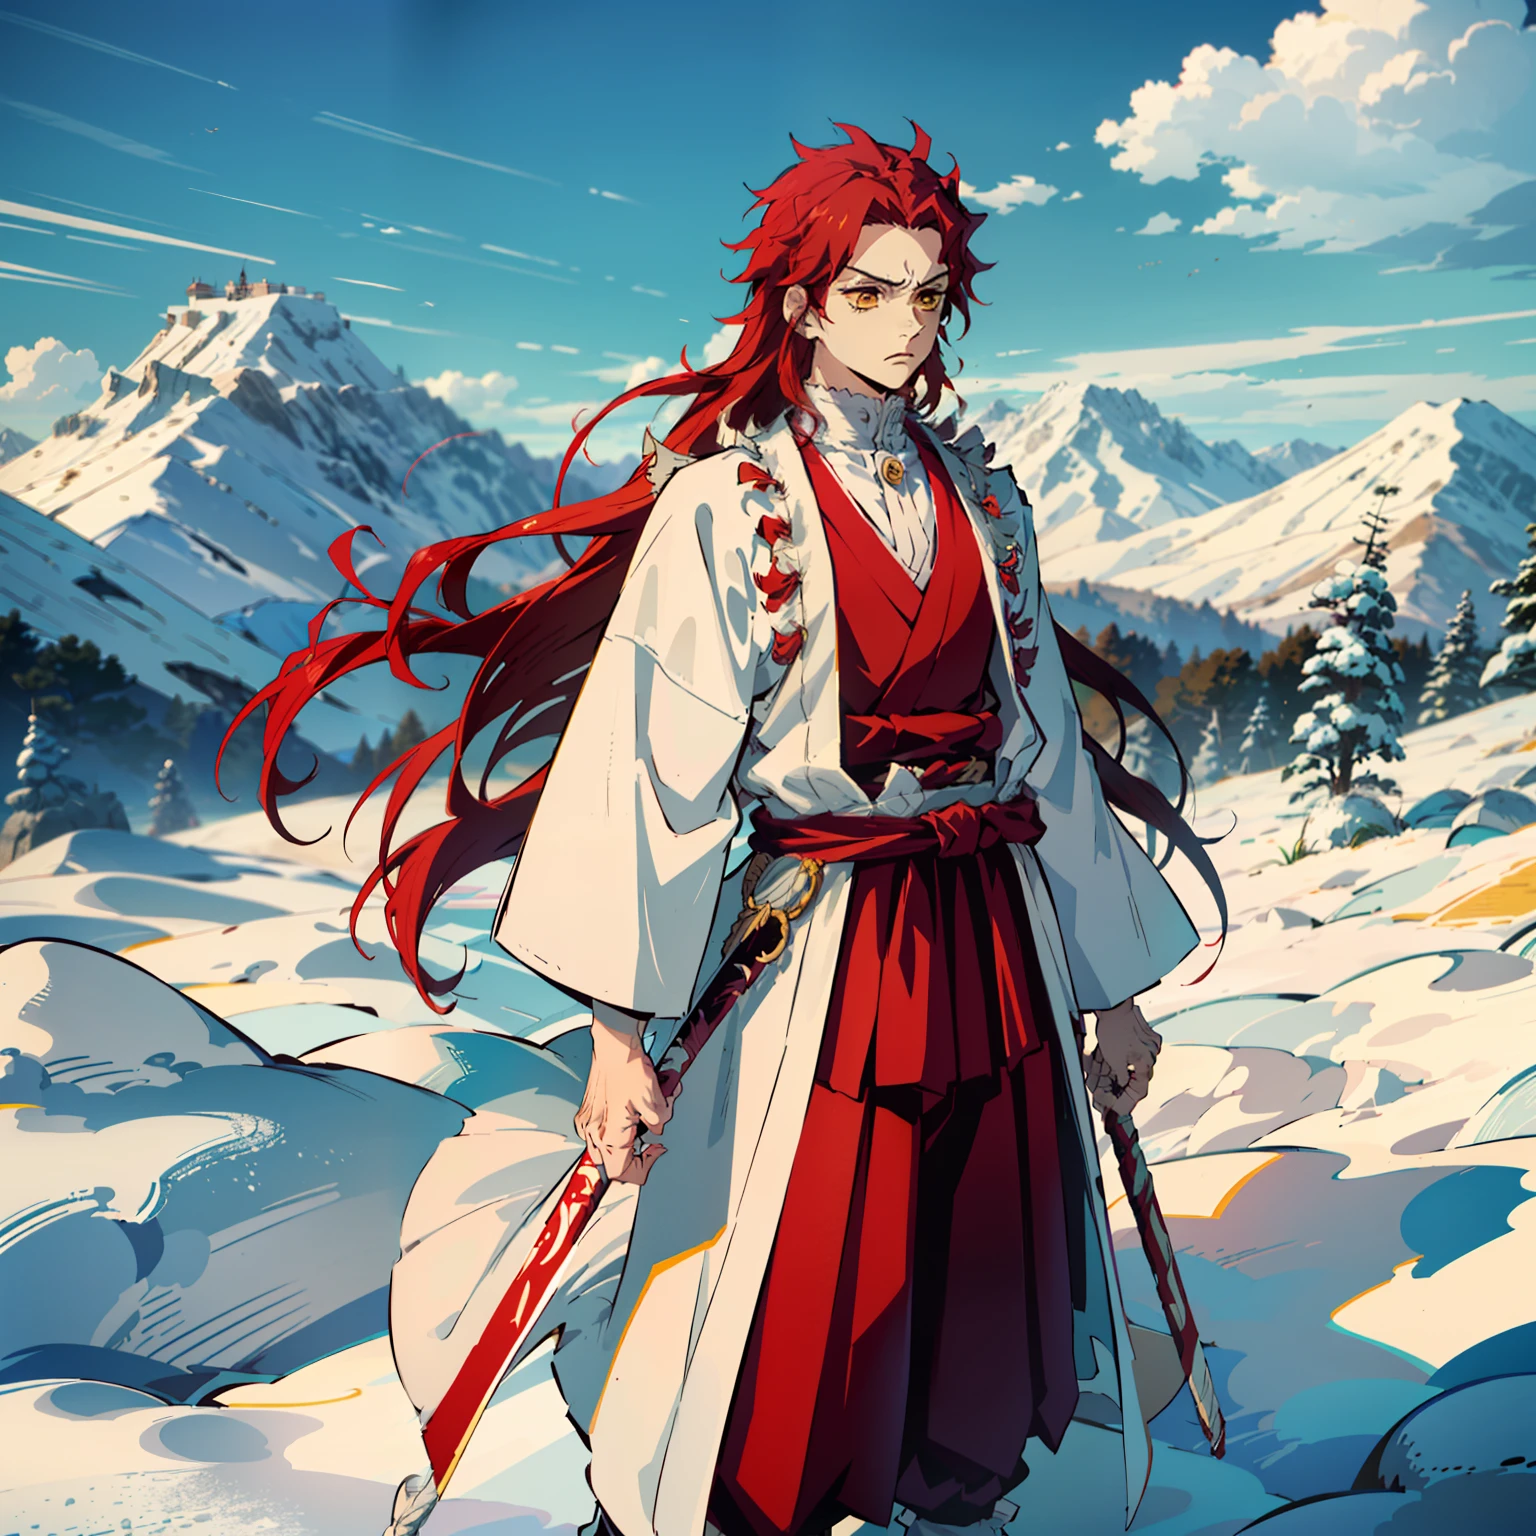 the anime, (Best Quality), 1 adult guy, stands still, (Wide body), (At the foot of the mountain), ((Disheveled red hair)), (Medium Hair), ((Impassive yellow eyes)), japanese clothes, Exposed white coat ((white with red frills)), ((hem at the waist)), The Art of the Demon Slayer, demon slayer artstyle, kimetsu no yaiba